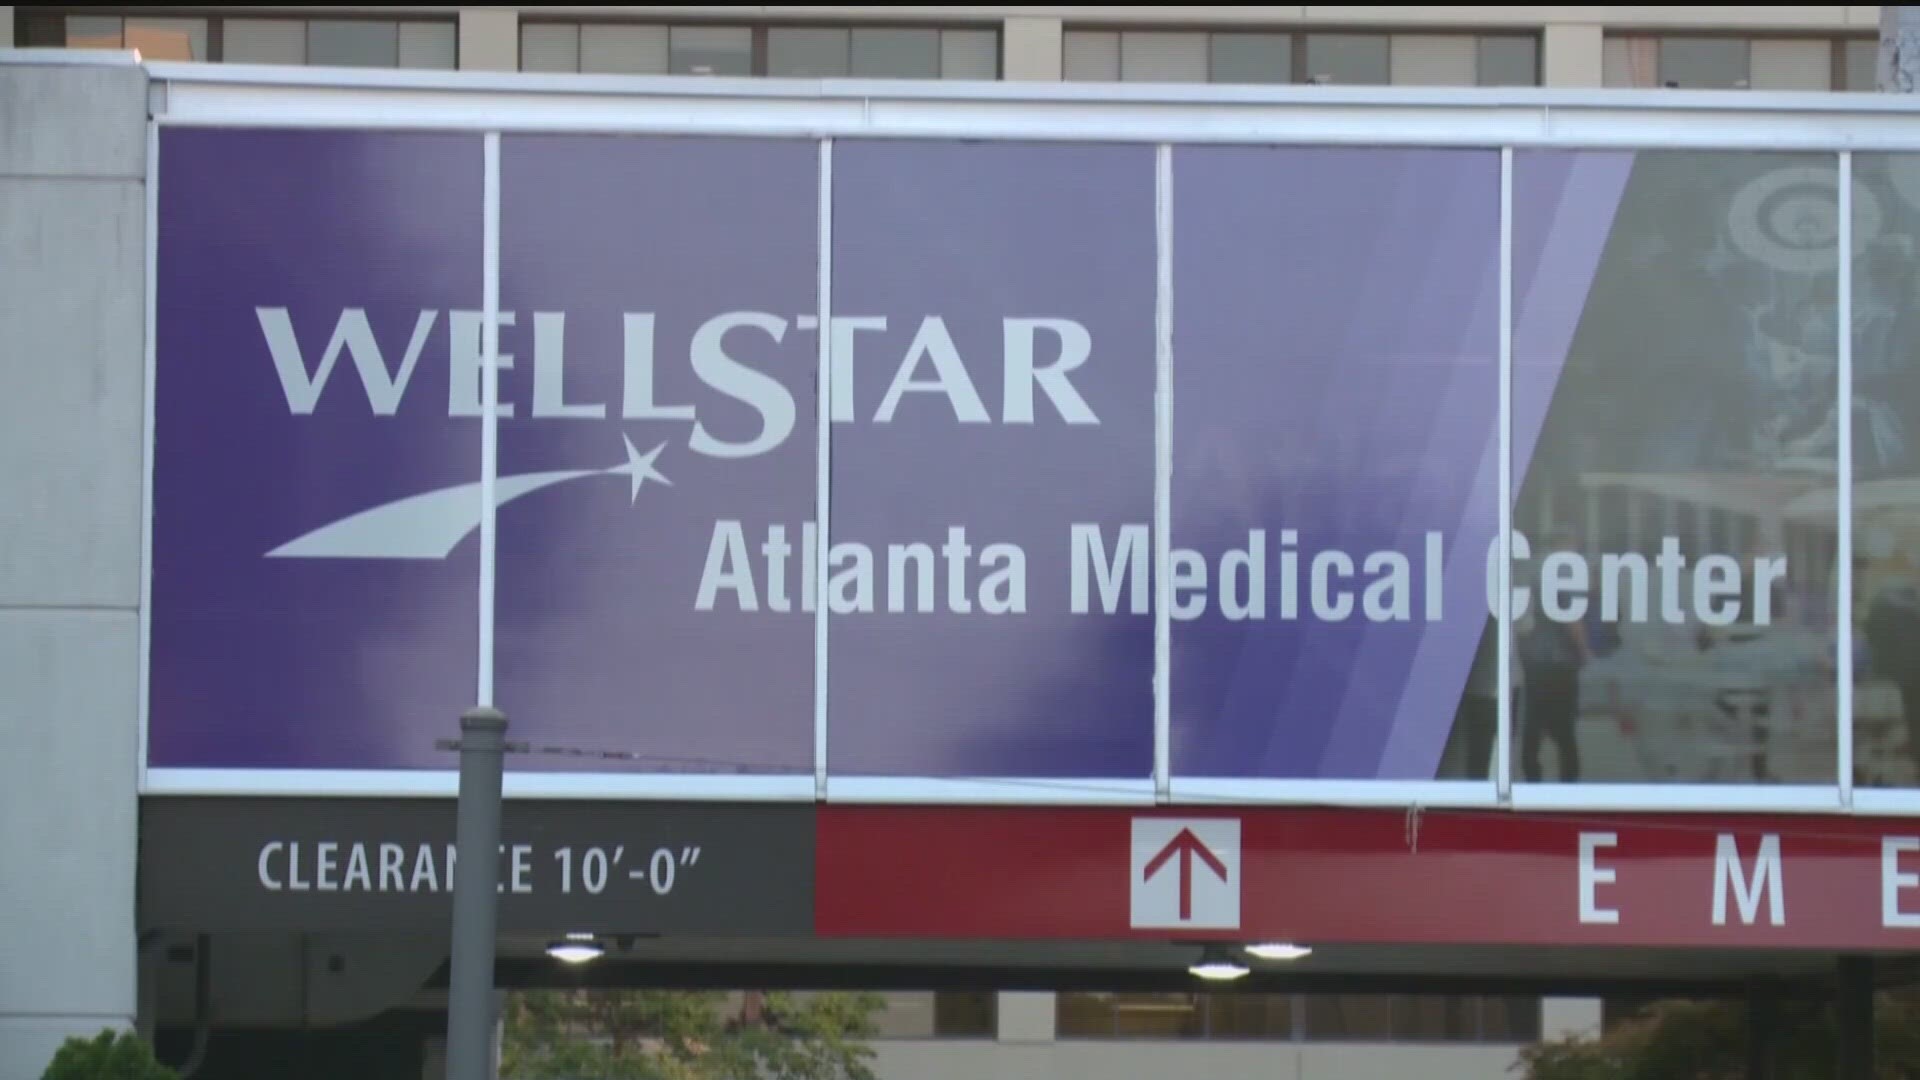 This comes after the closing of Wellstar Atlanta Medical Center last year.